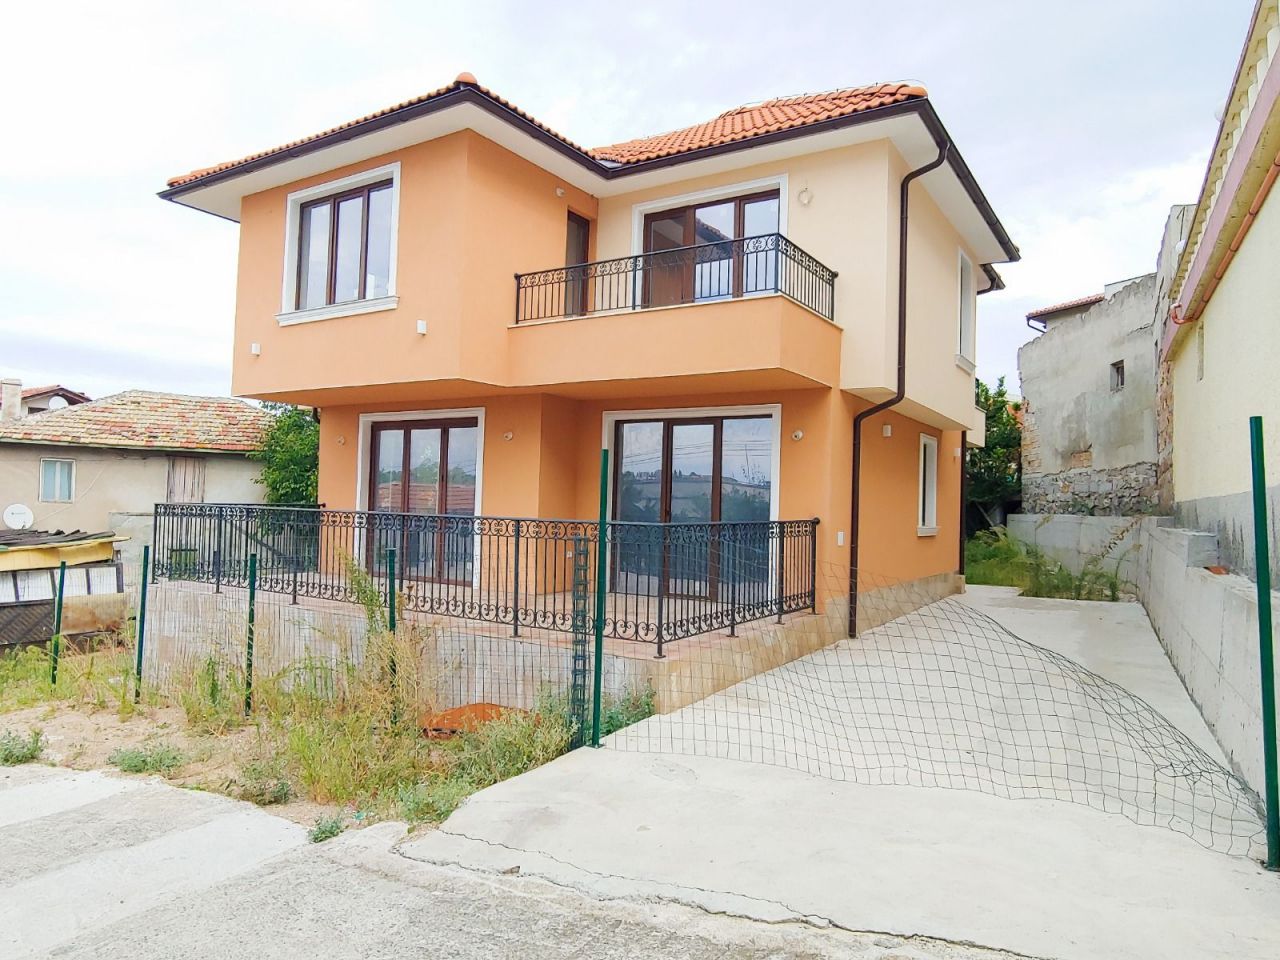 House in Chernomorets, Bulgaria, 205 sq.m - picture 1